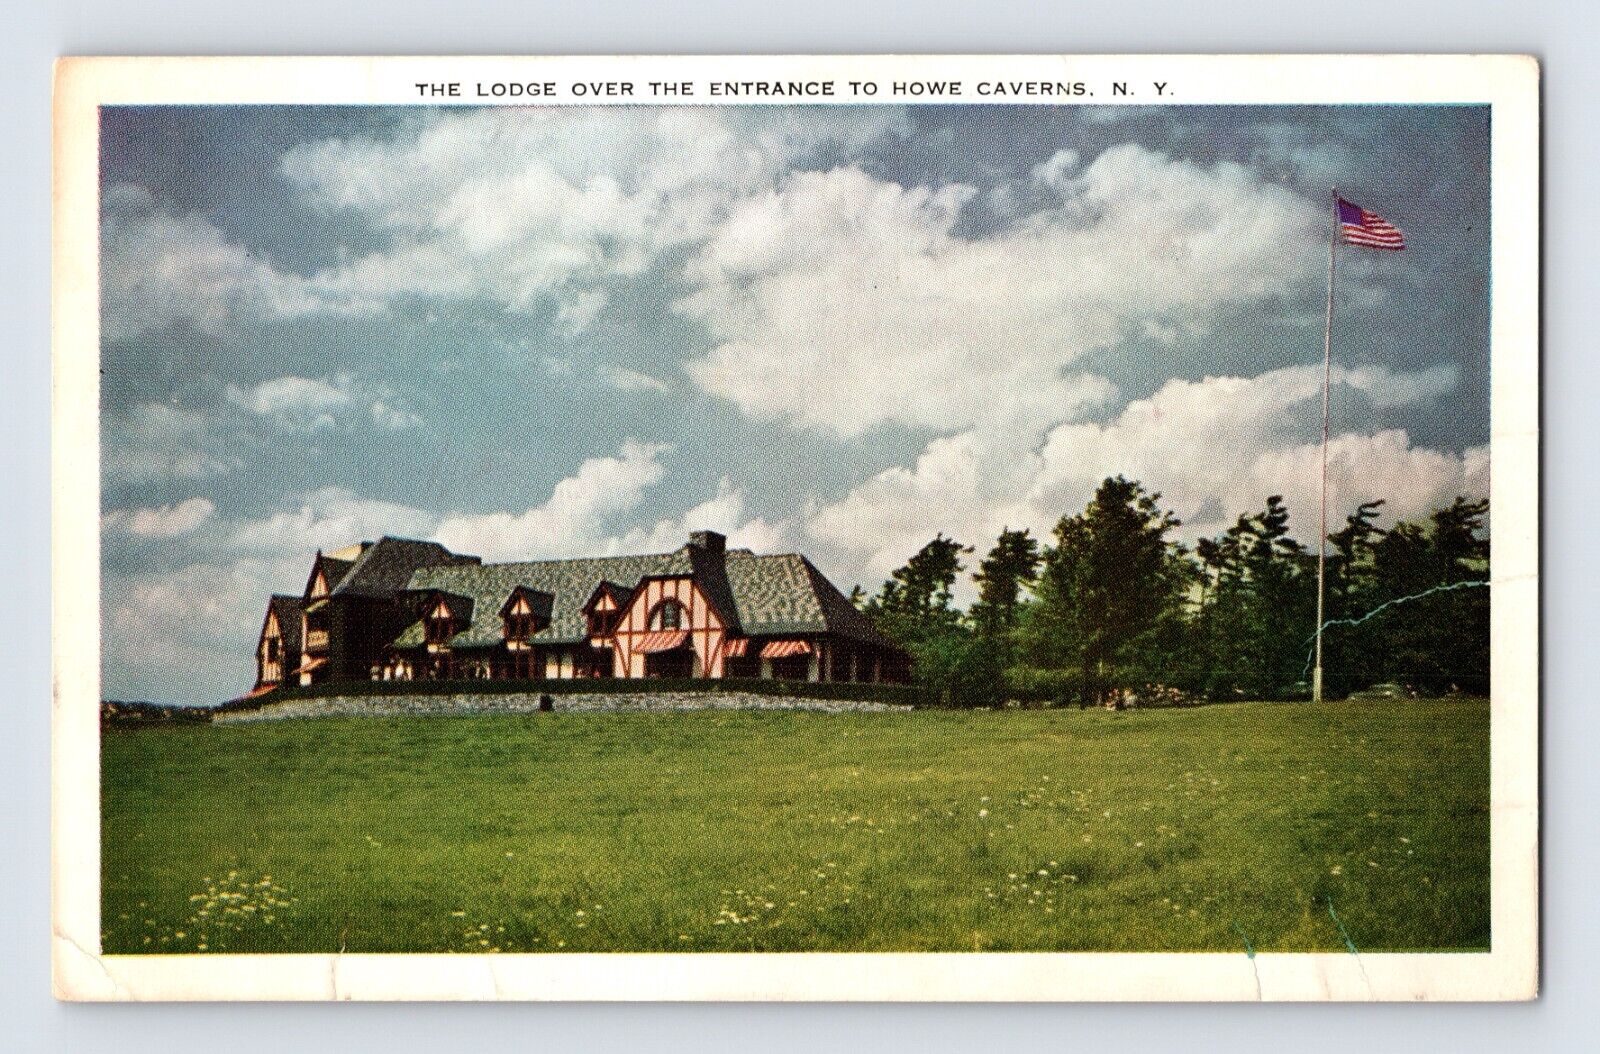 Postcard New York Howe Caverns NY Lodge Hotel Entrance 1940s Unposted Chrome